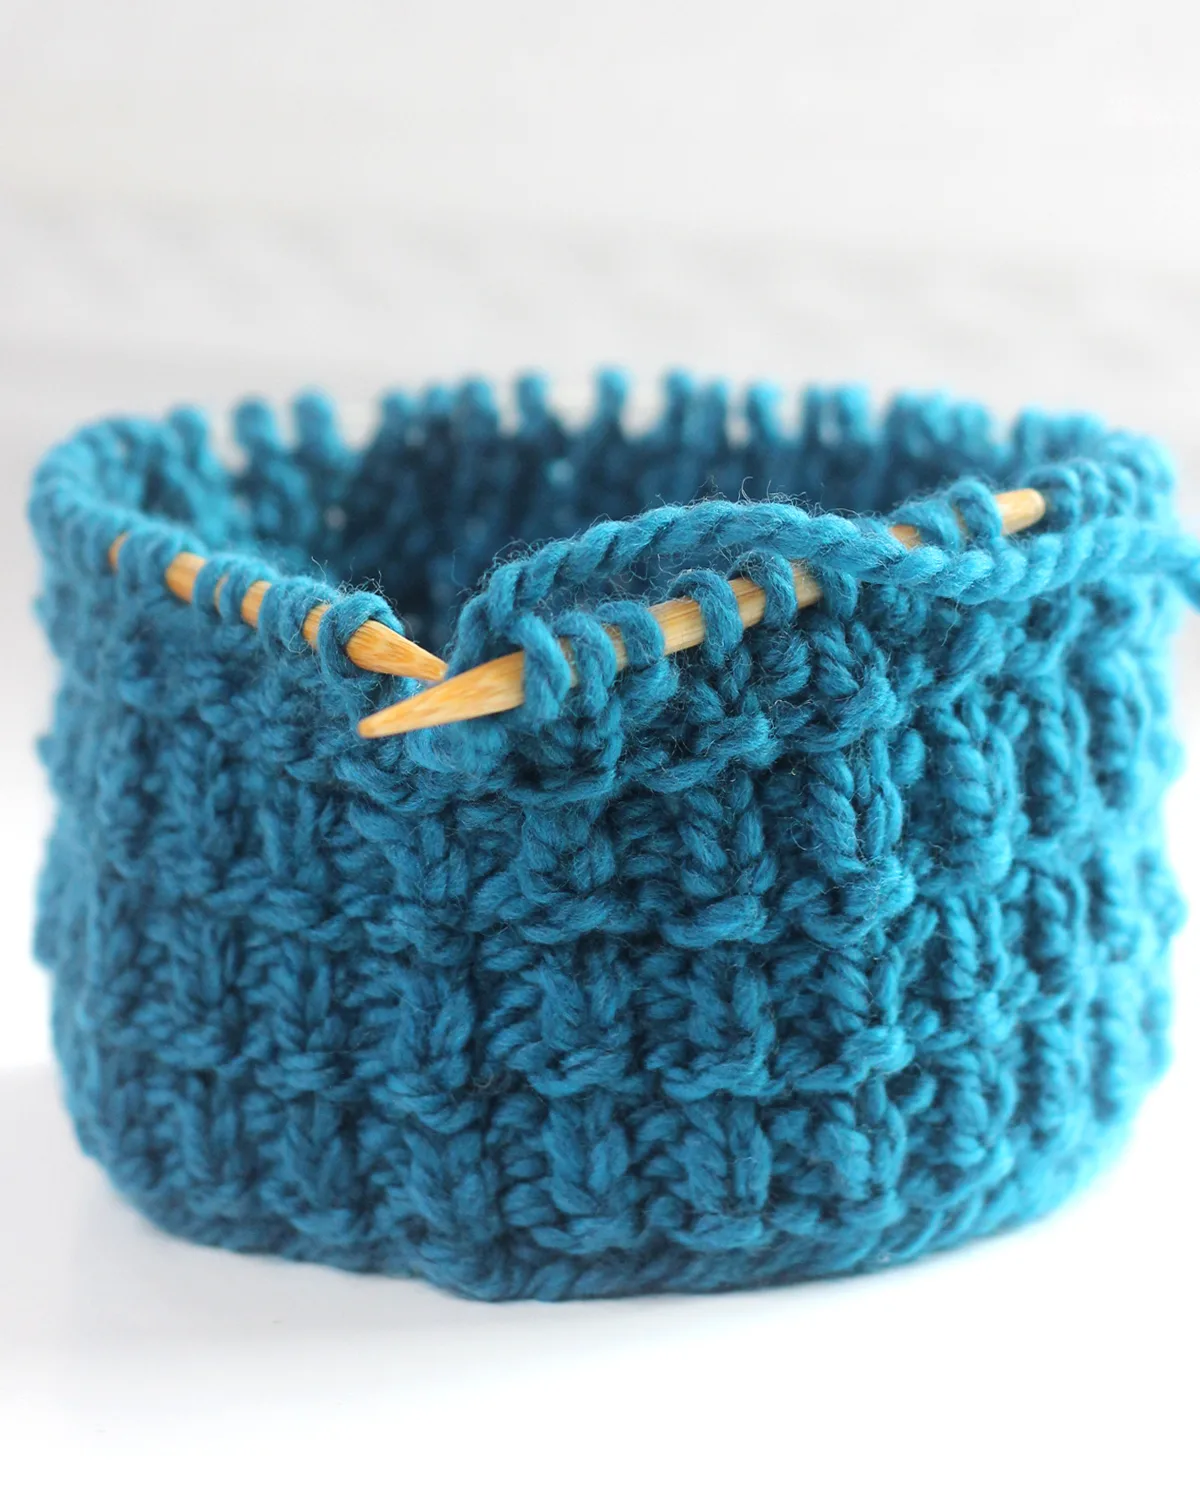 Hurdle stitch knitting texture on circular bamboo needles with blue colored yarn.